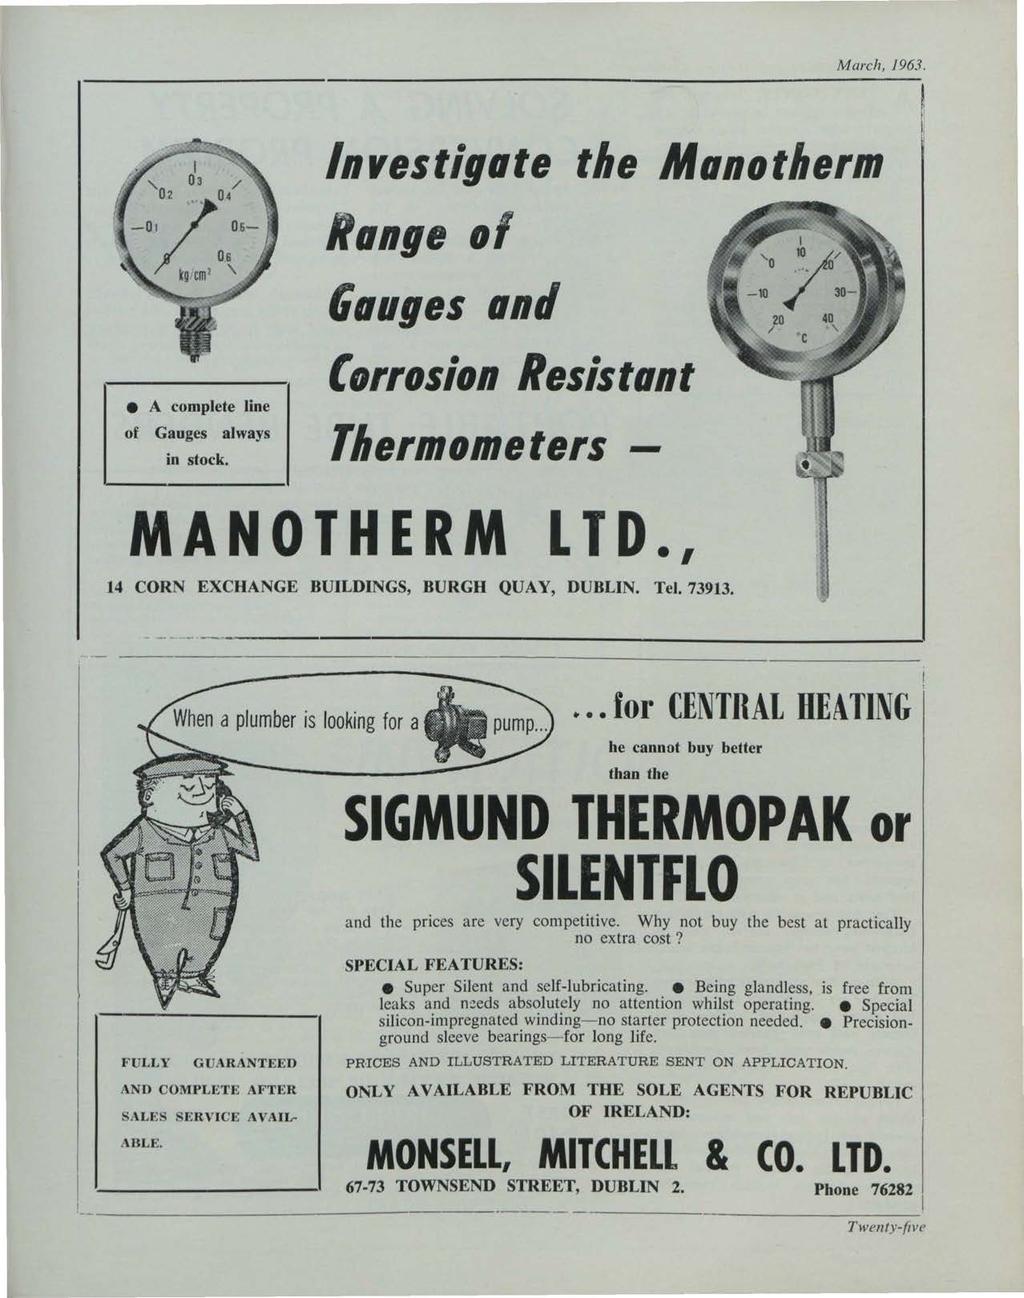 et al.: The Irish Plumber and Heating Contractor, March 1963 (complete is March, 1963. e A complete line of Gauges always in stock.